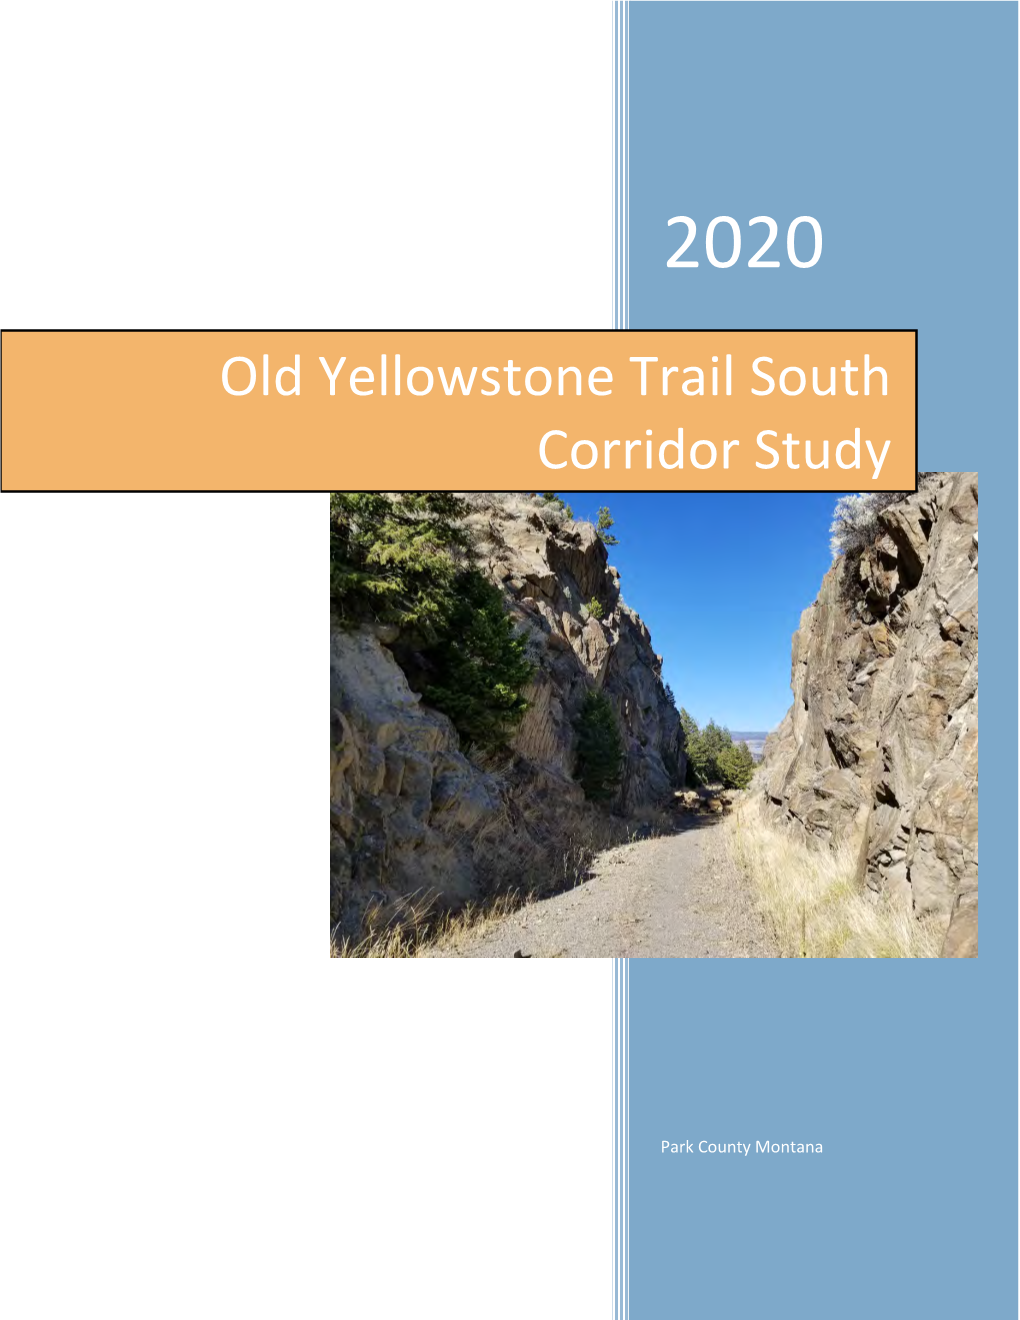 Old Yellowstone Trail South Corridor Study